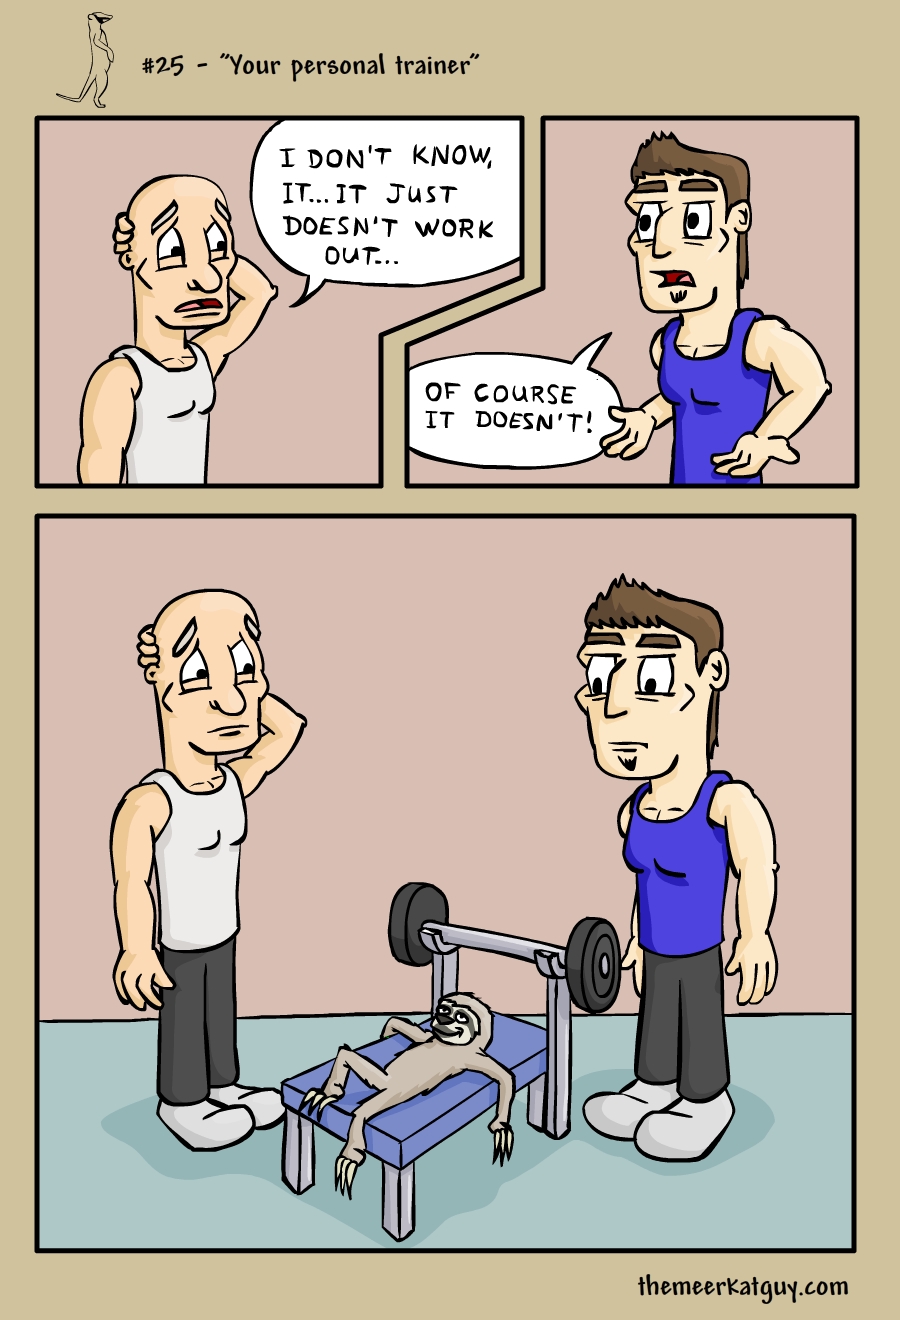 Your personal trainer